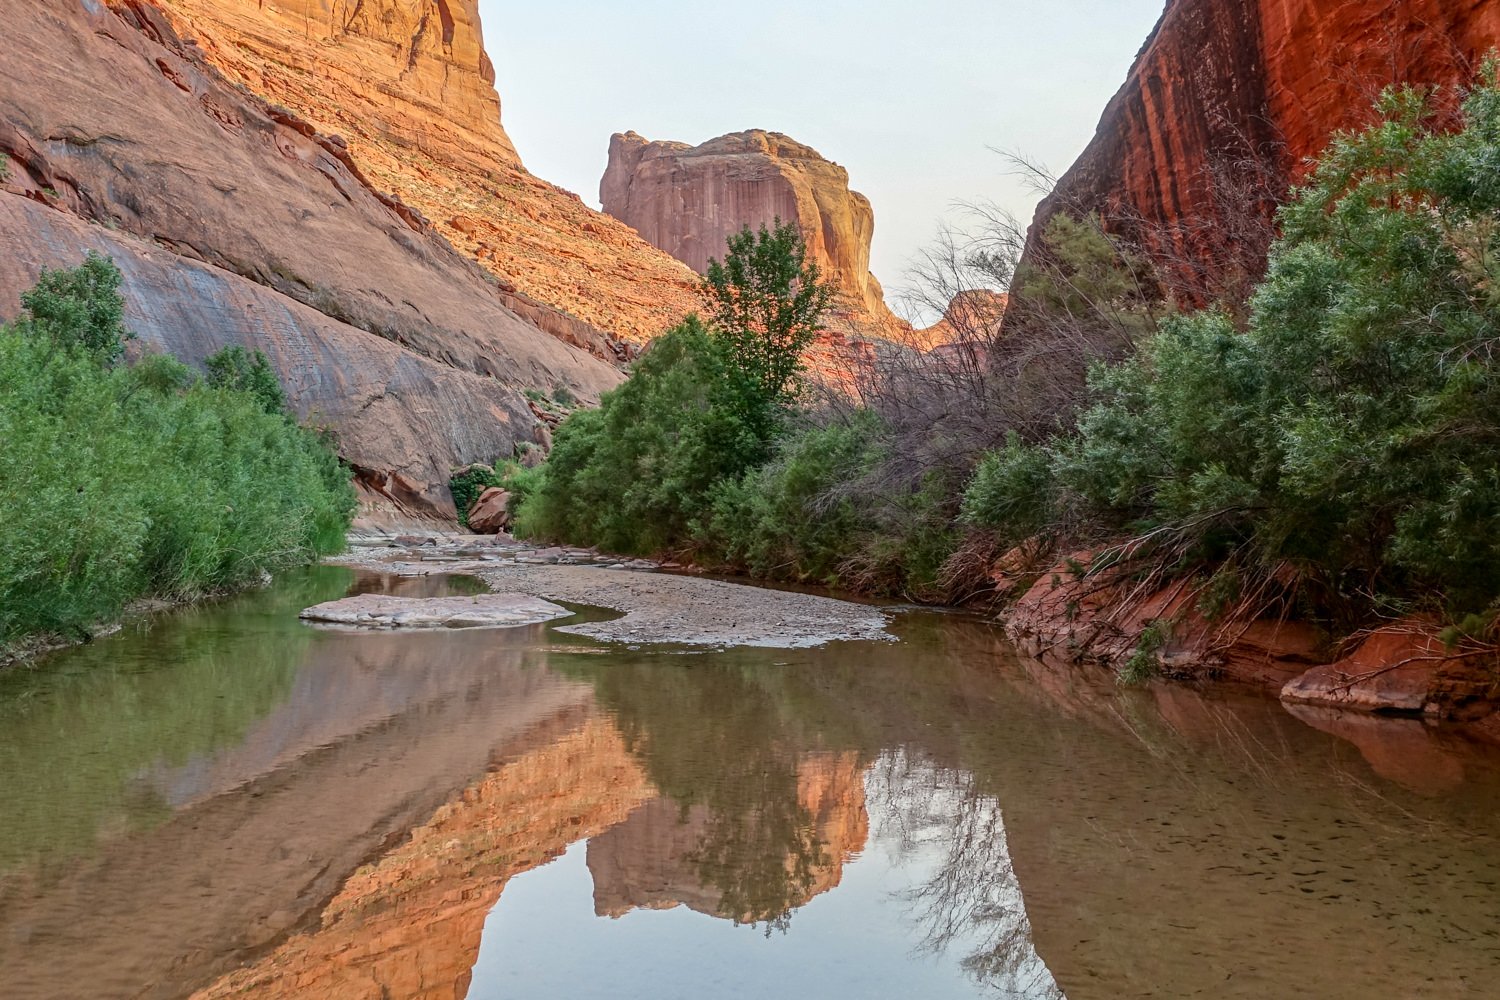 A red rock monolith reflecting in the water at Coyote Gulch